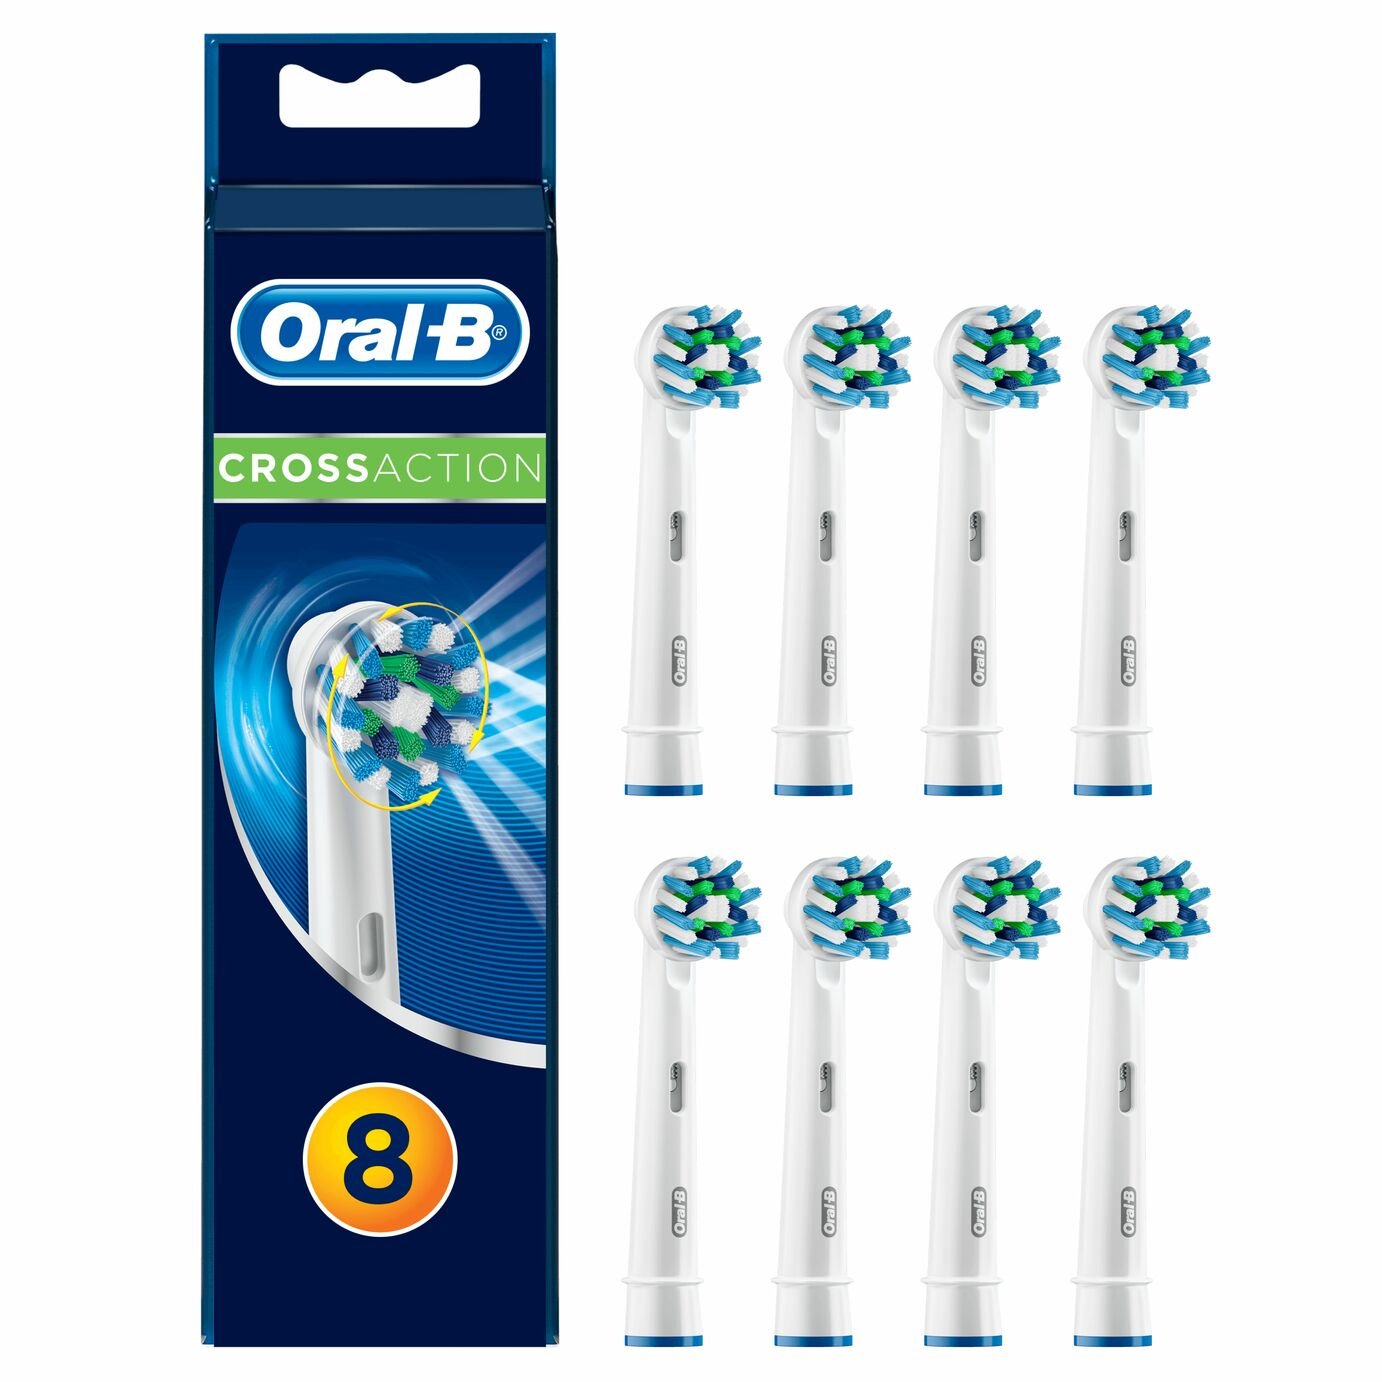 Oral-B CrossAction Electric Toothbrush Heads - 8 Pack